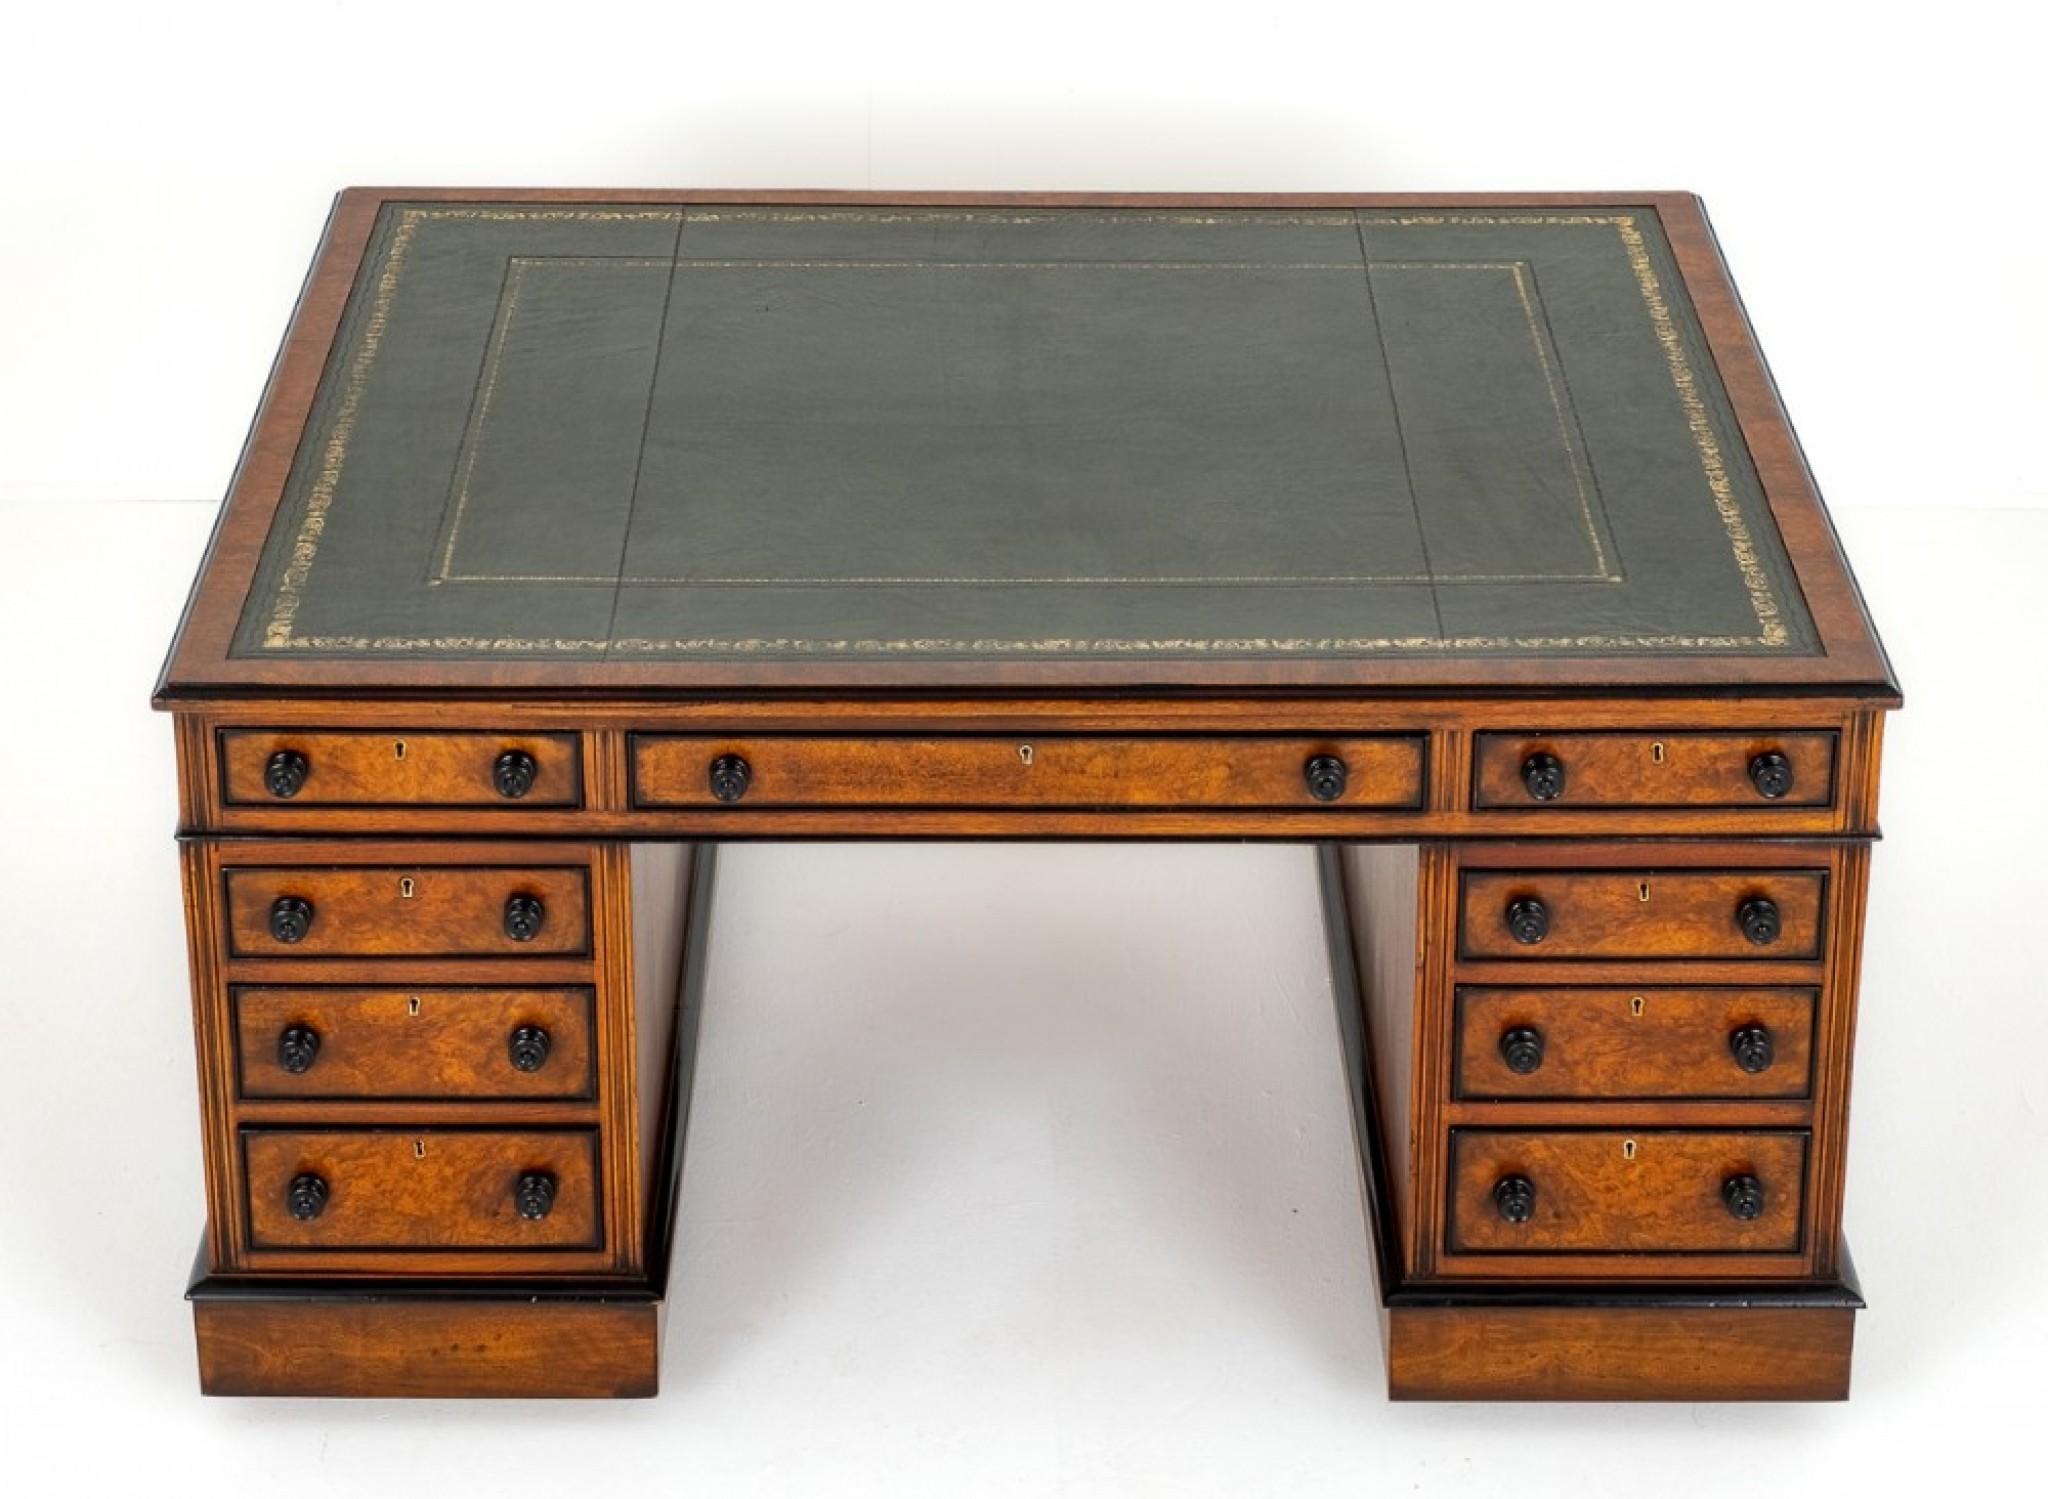 Gorgeous Victorian partners desk in burr walnut
Circa 1870
This Wonderful Desk has a Green Leather Writing Surface (replacement) with hand applied gilt and blind tooling and Burr Walnut Crossbanding.
The intricate details, such as carved accents,